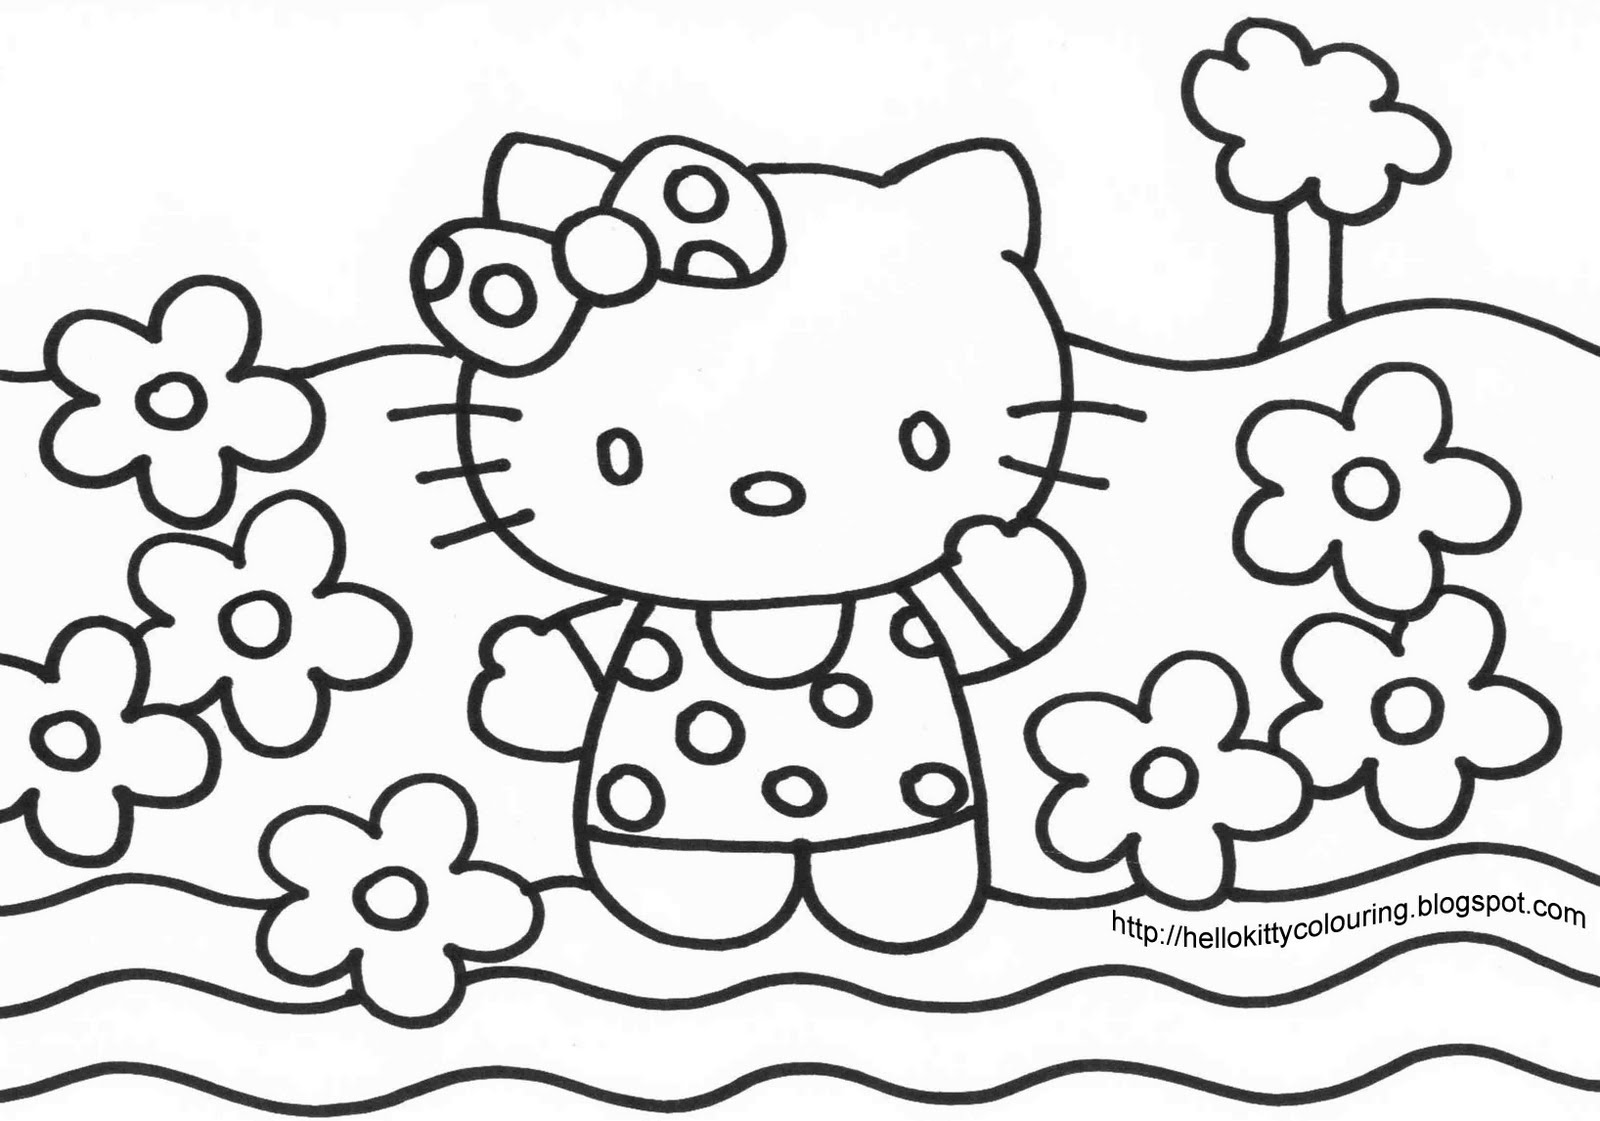 HELLO KITTY AT THE BEACH COLOURING PAGE